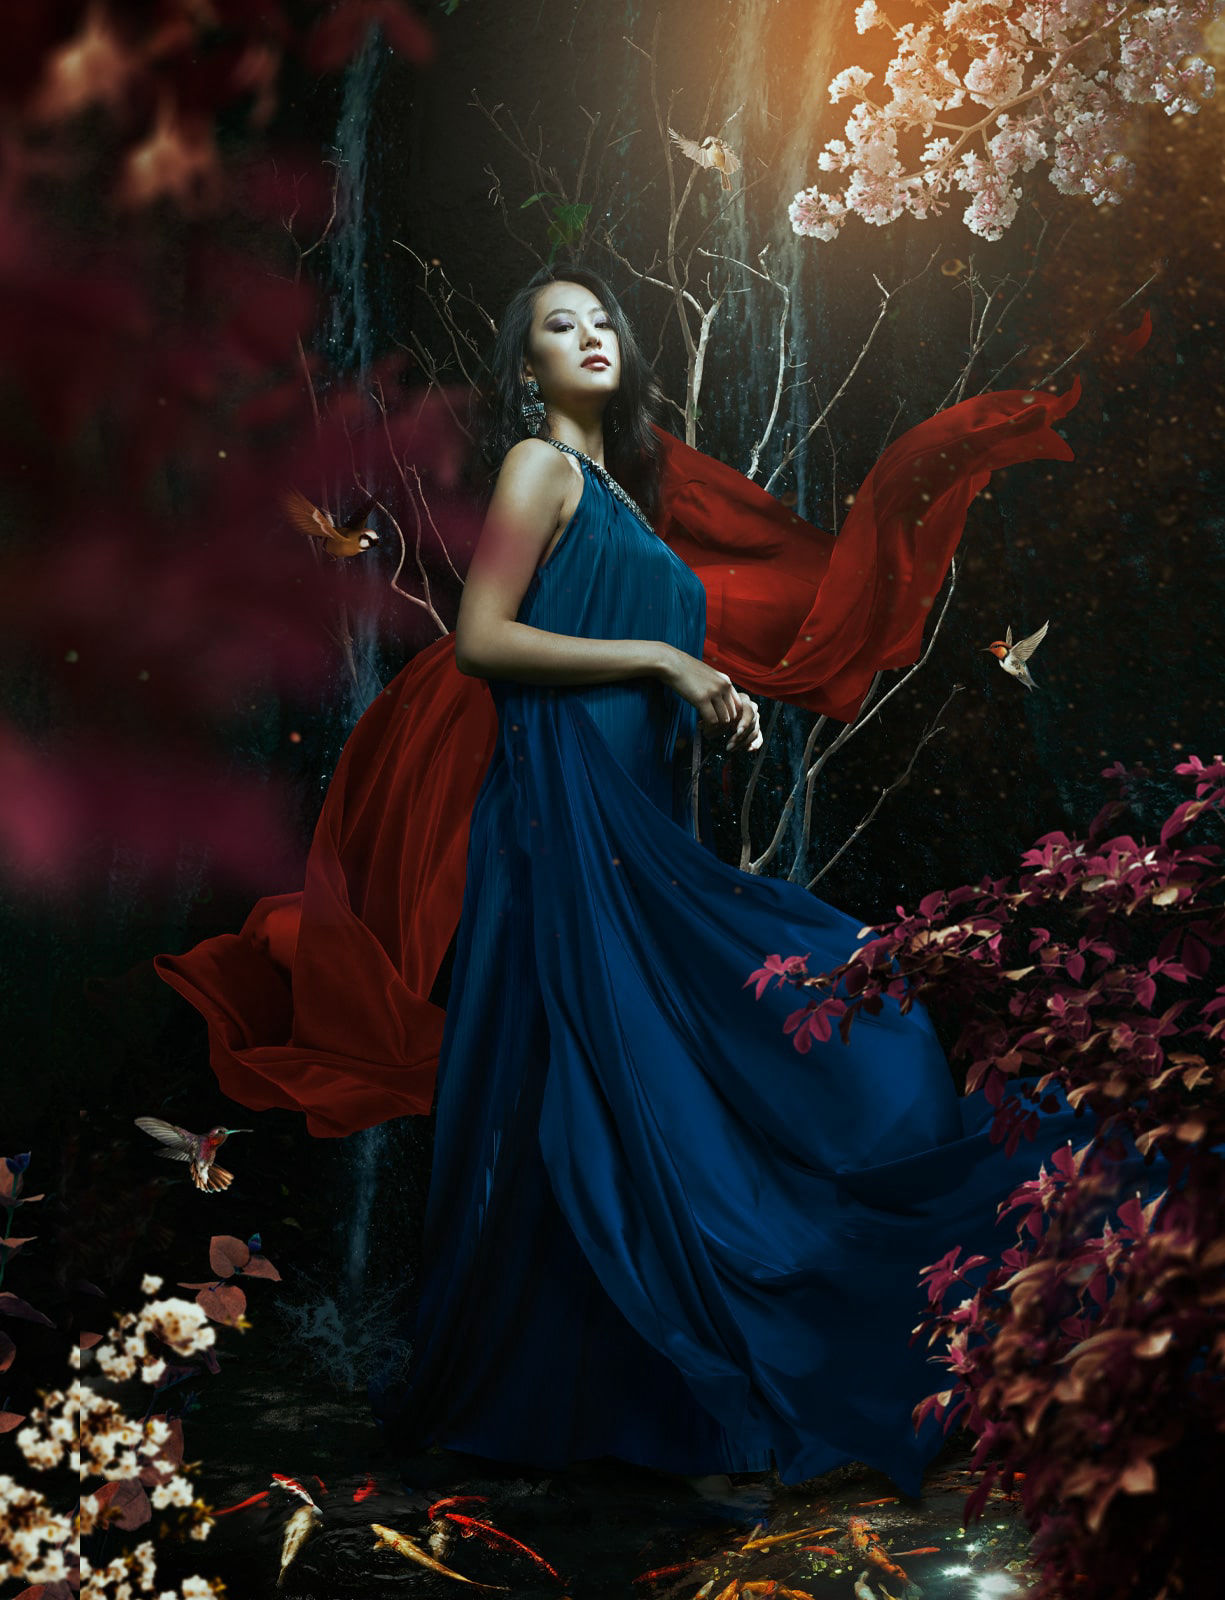 Fine art photography of a cinese model wearing a blue tunic surrounded by flowers and hummingbirds in nature